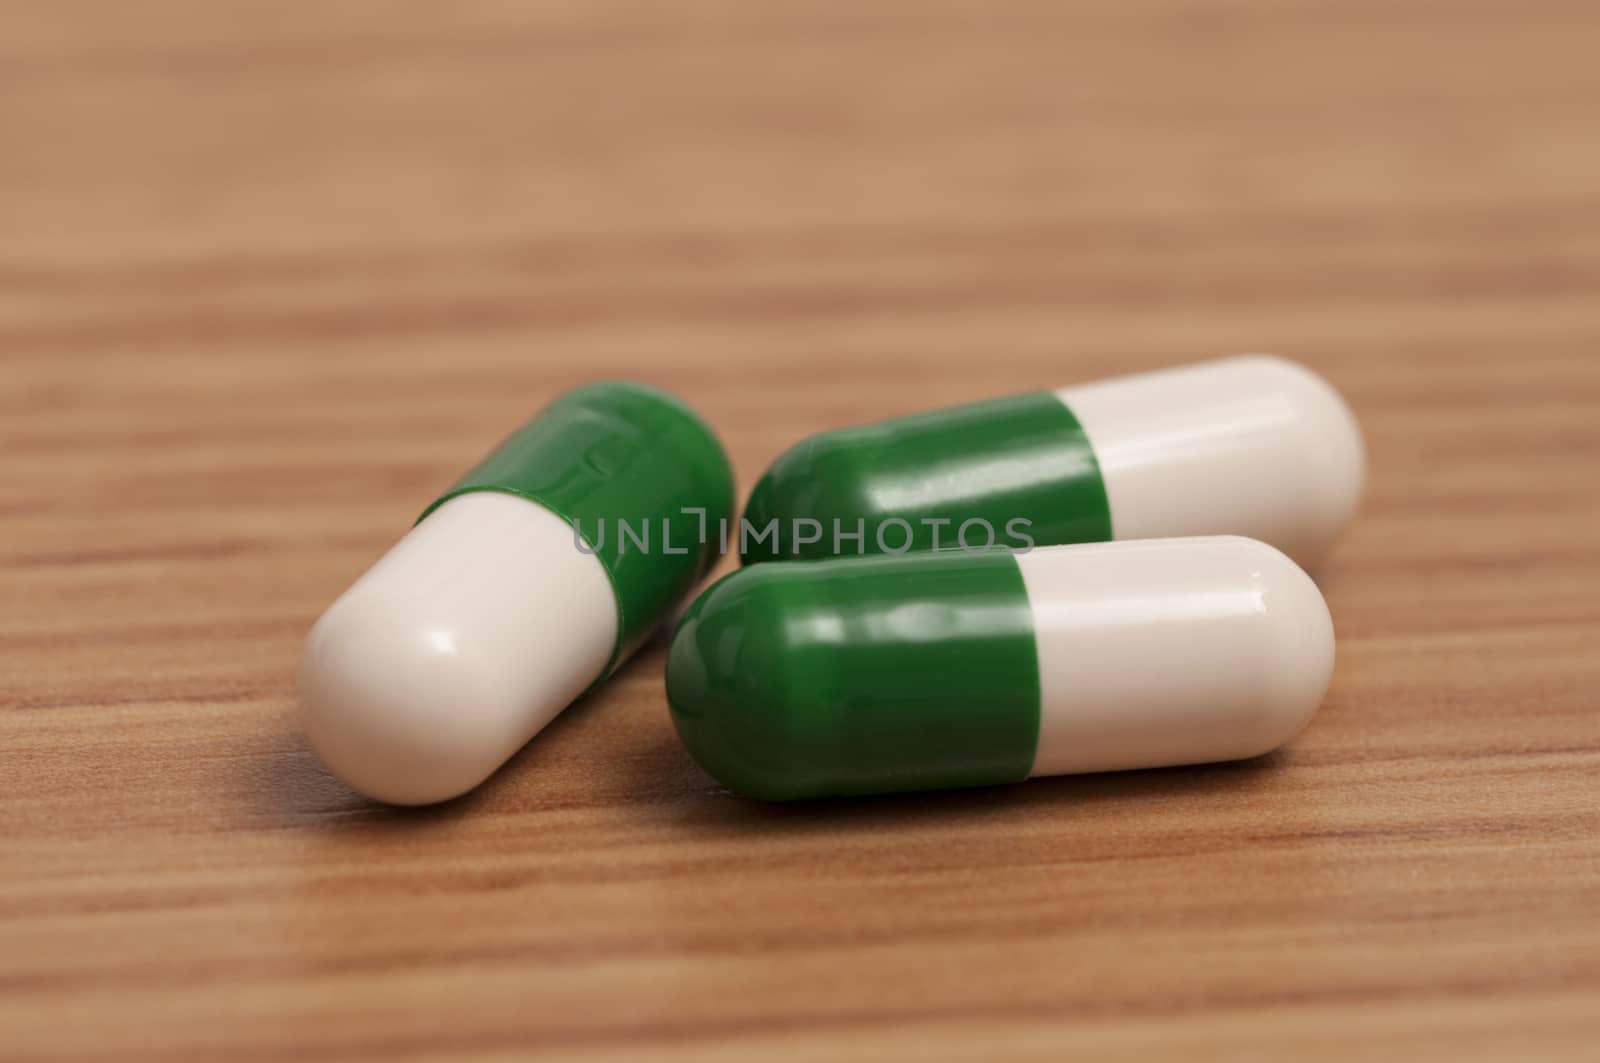 Three capsules or pills on the table